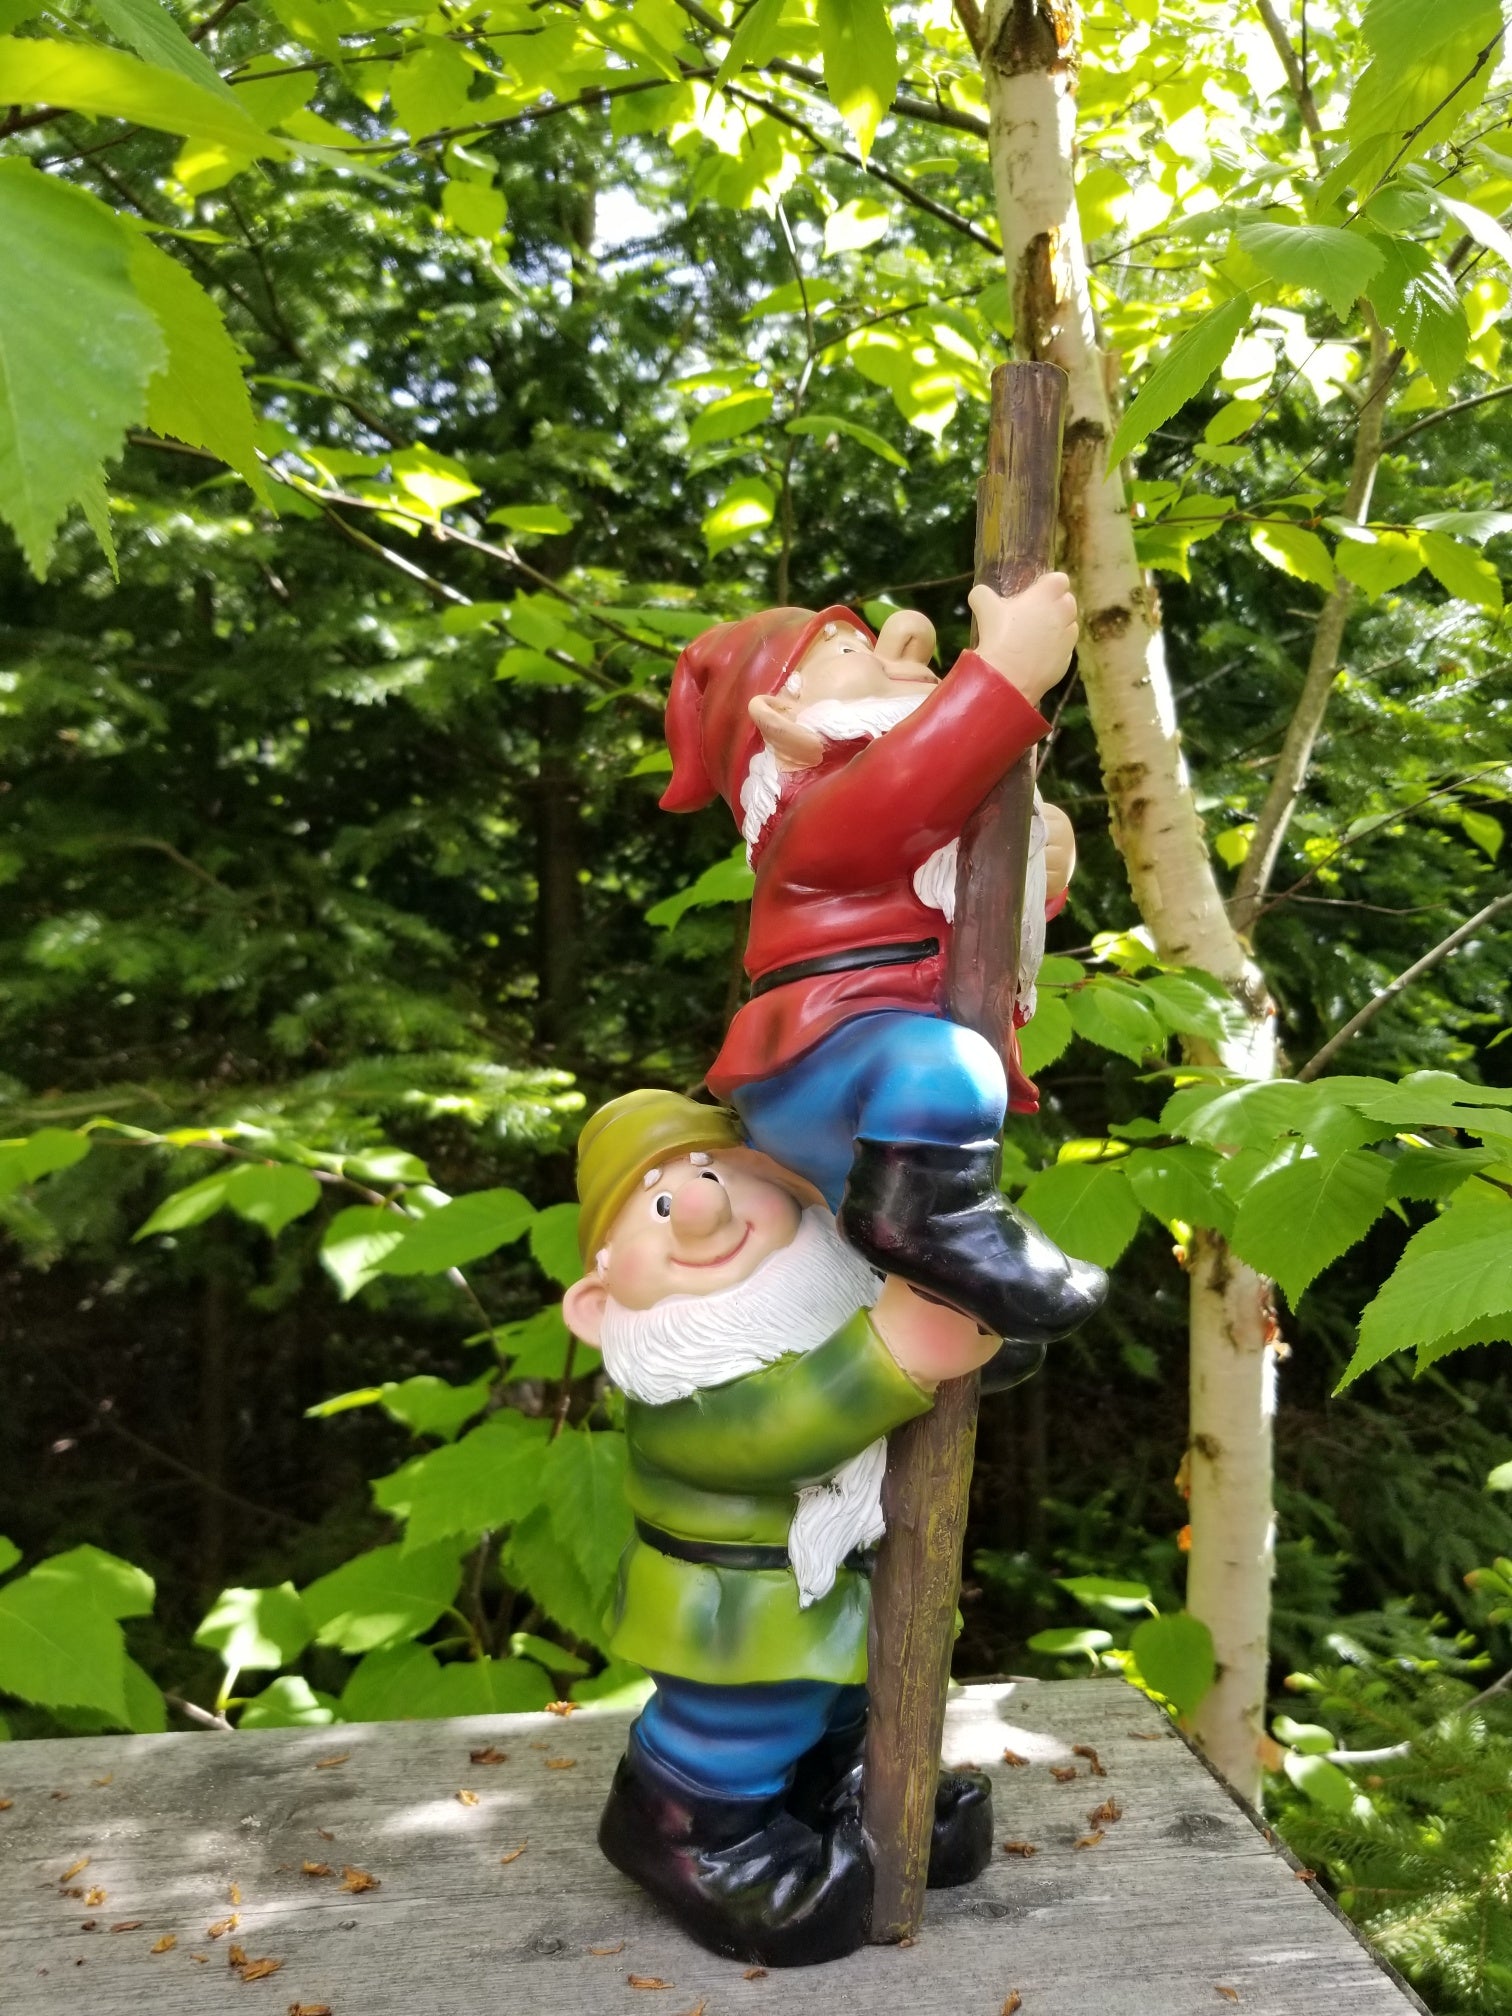 buy a ladder gnome statue at auction